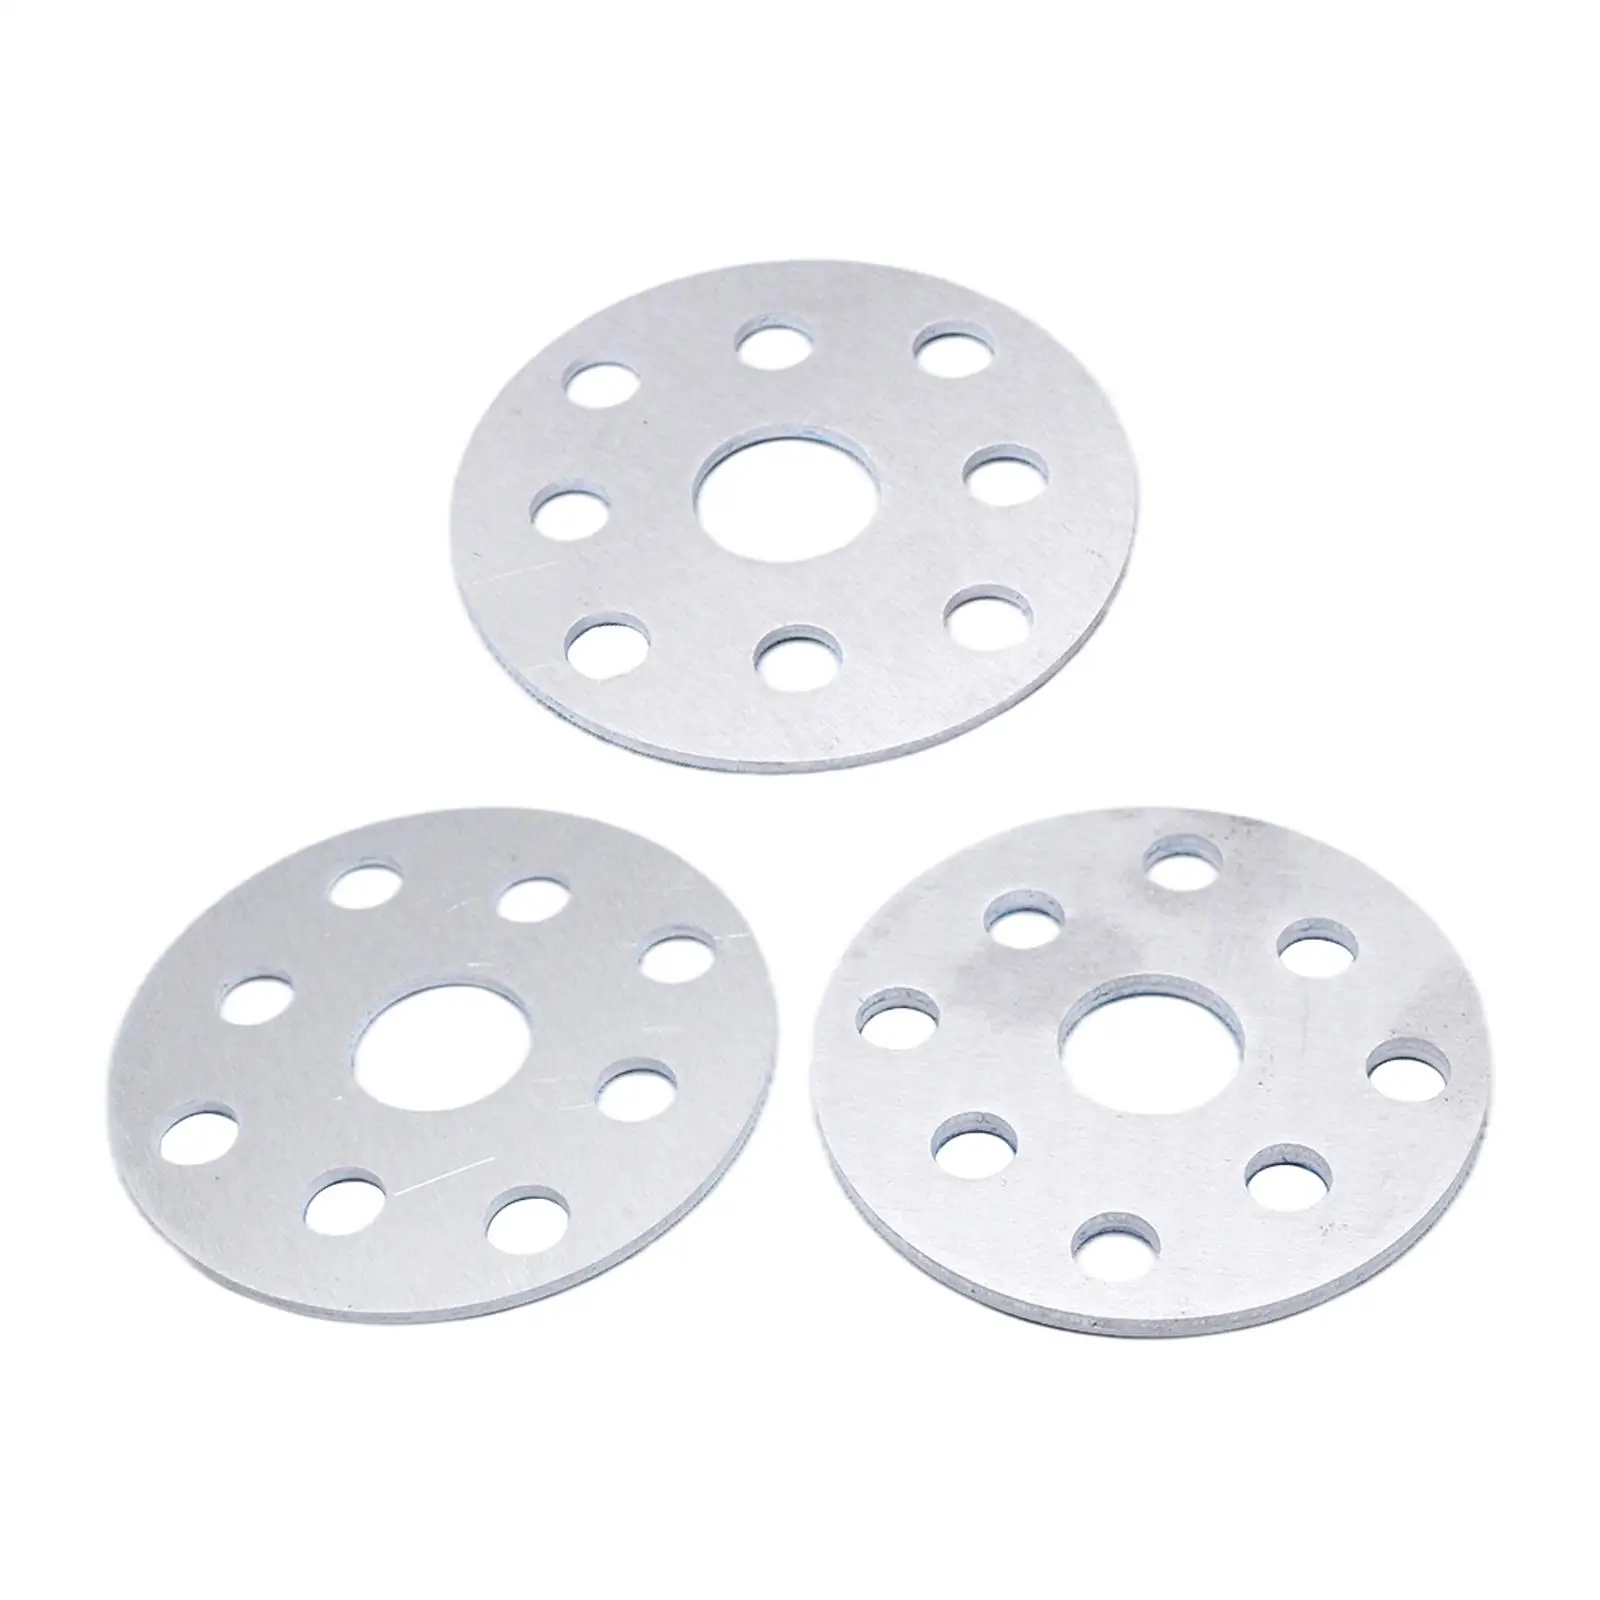 3Pcs Water Pump Spacer Metal for 302 350 427 454 Pulley Fan